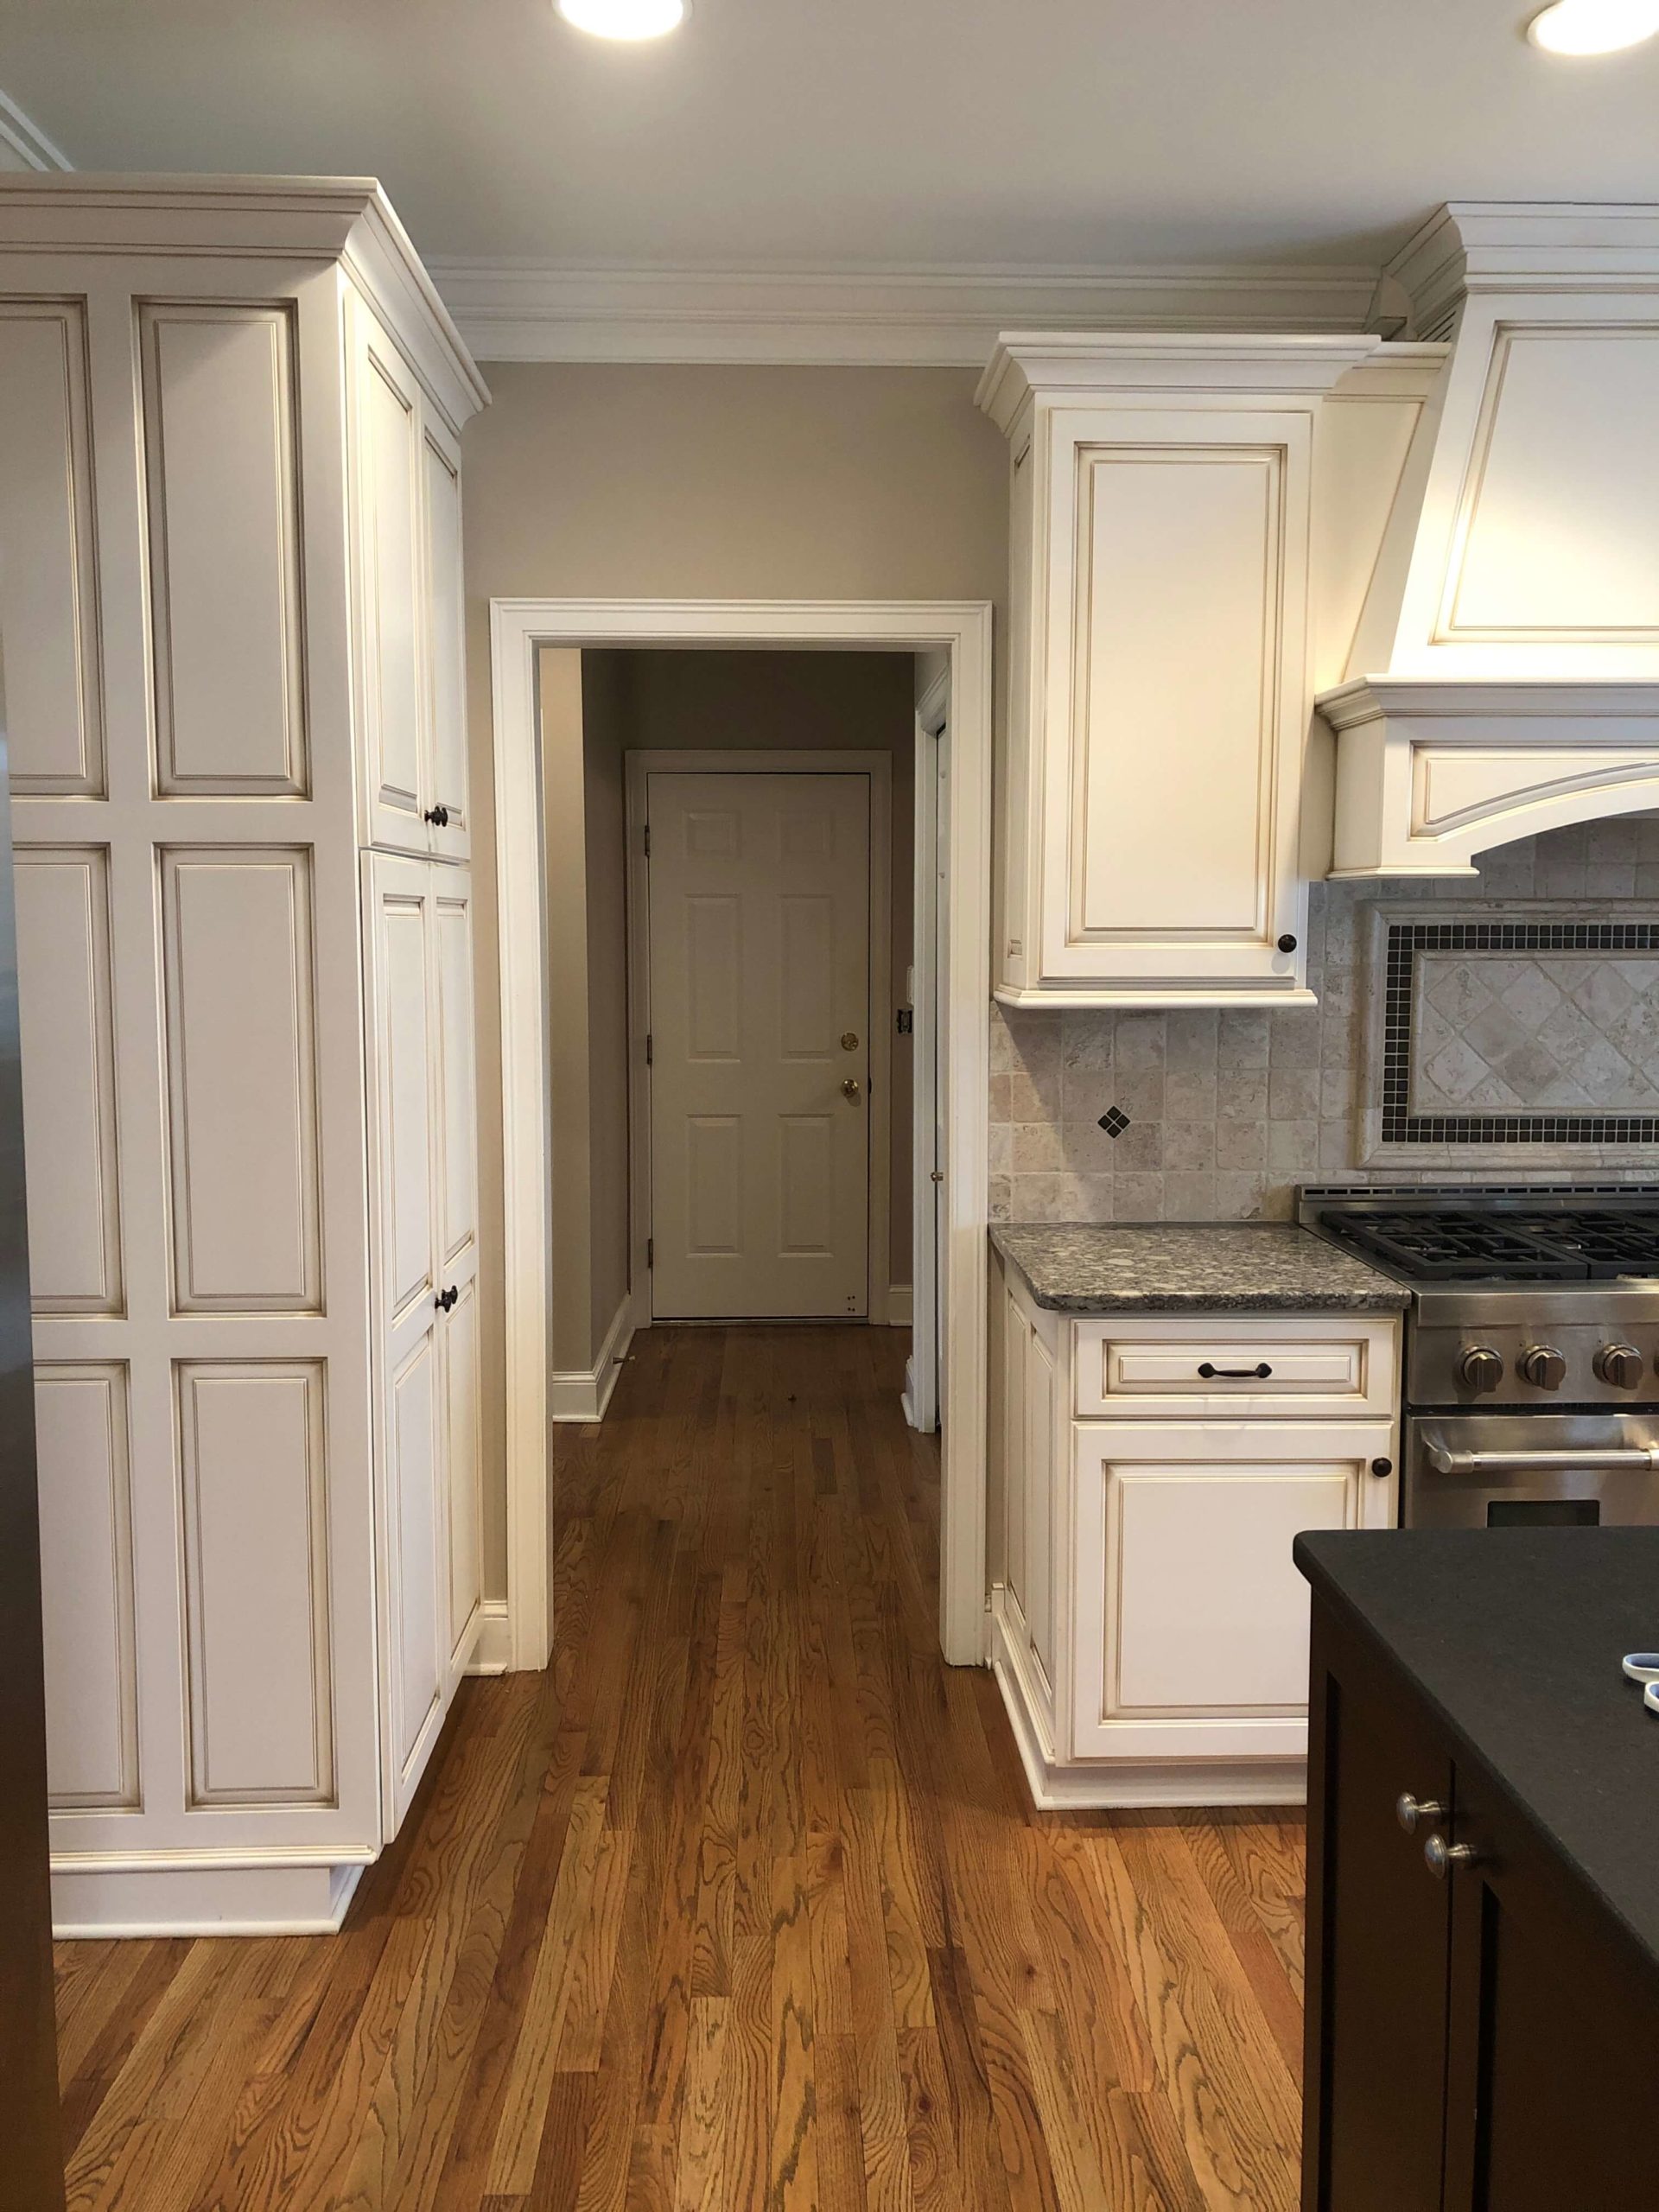 Progress photo of taupe cabinetry in kitchen space with yellow beige floors, cherry cabinetry, and a pink beige backsplash